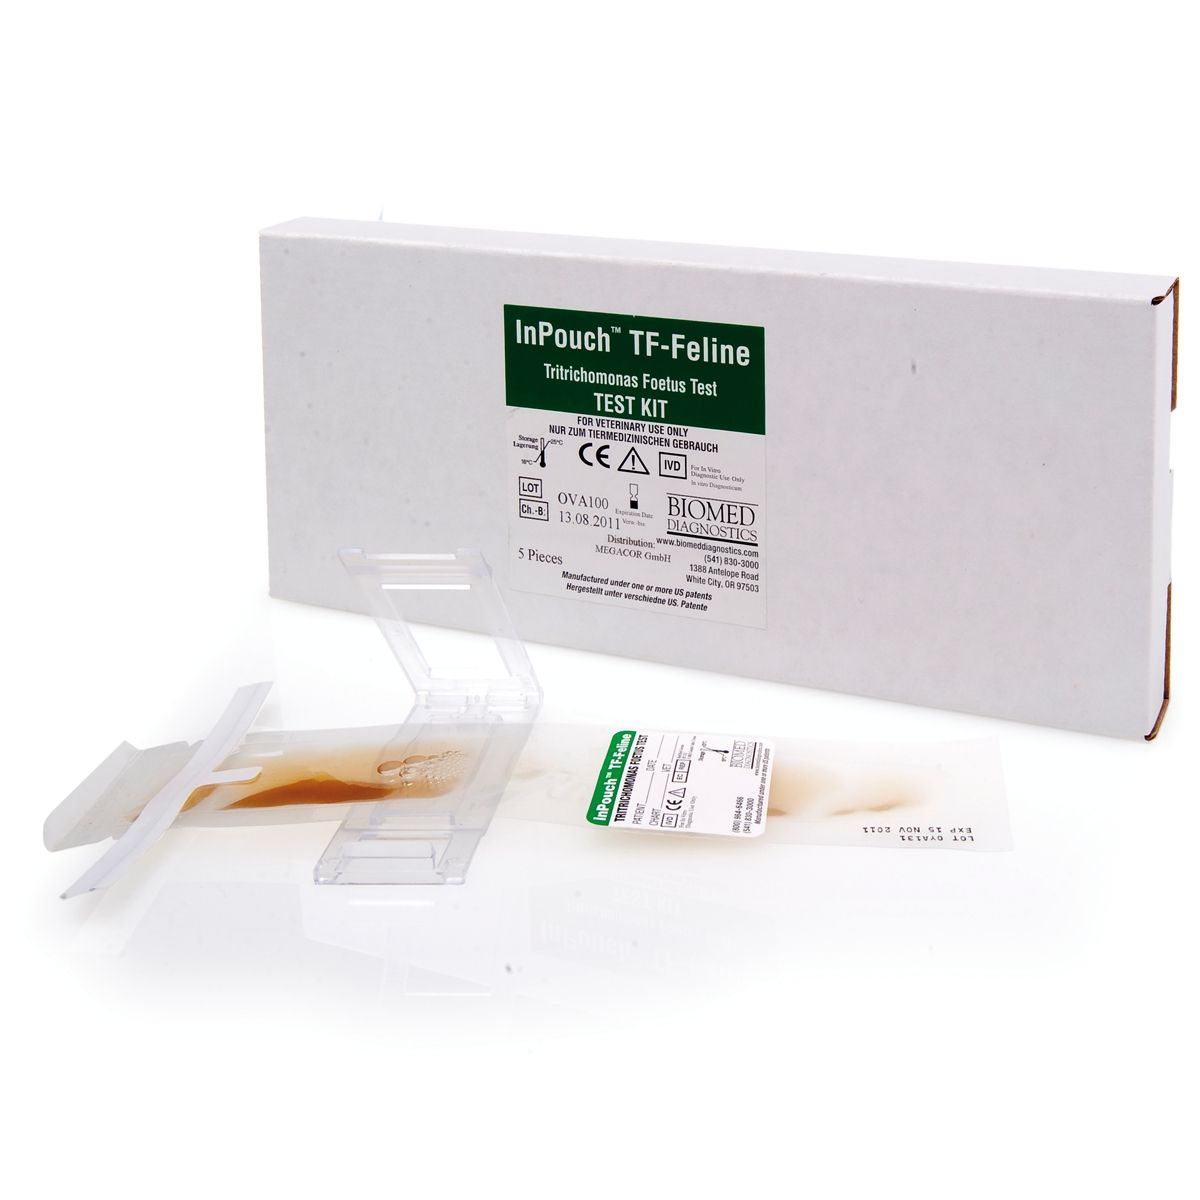 A commercial kit for culturing T. foetus from fecal samples is available in many countries.